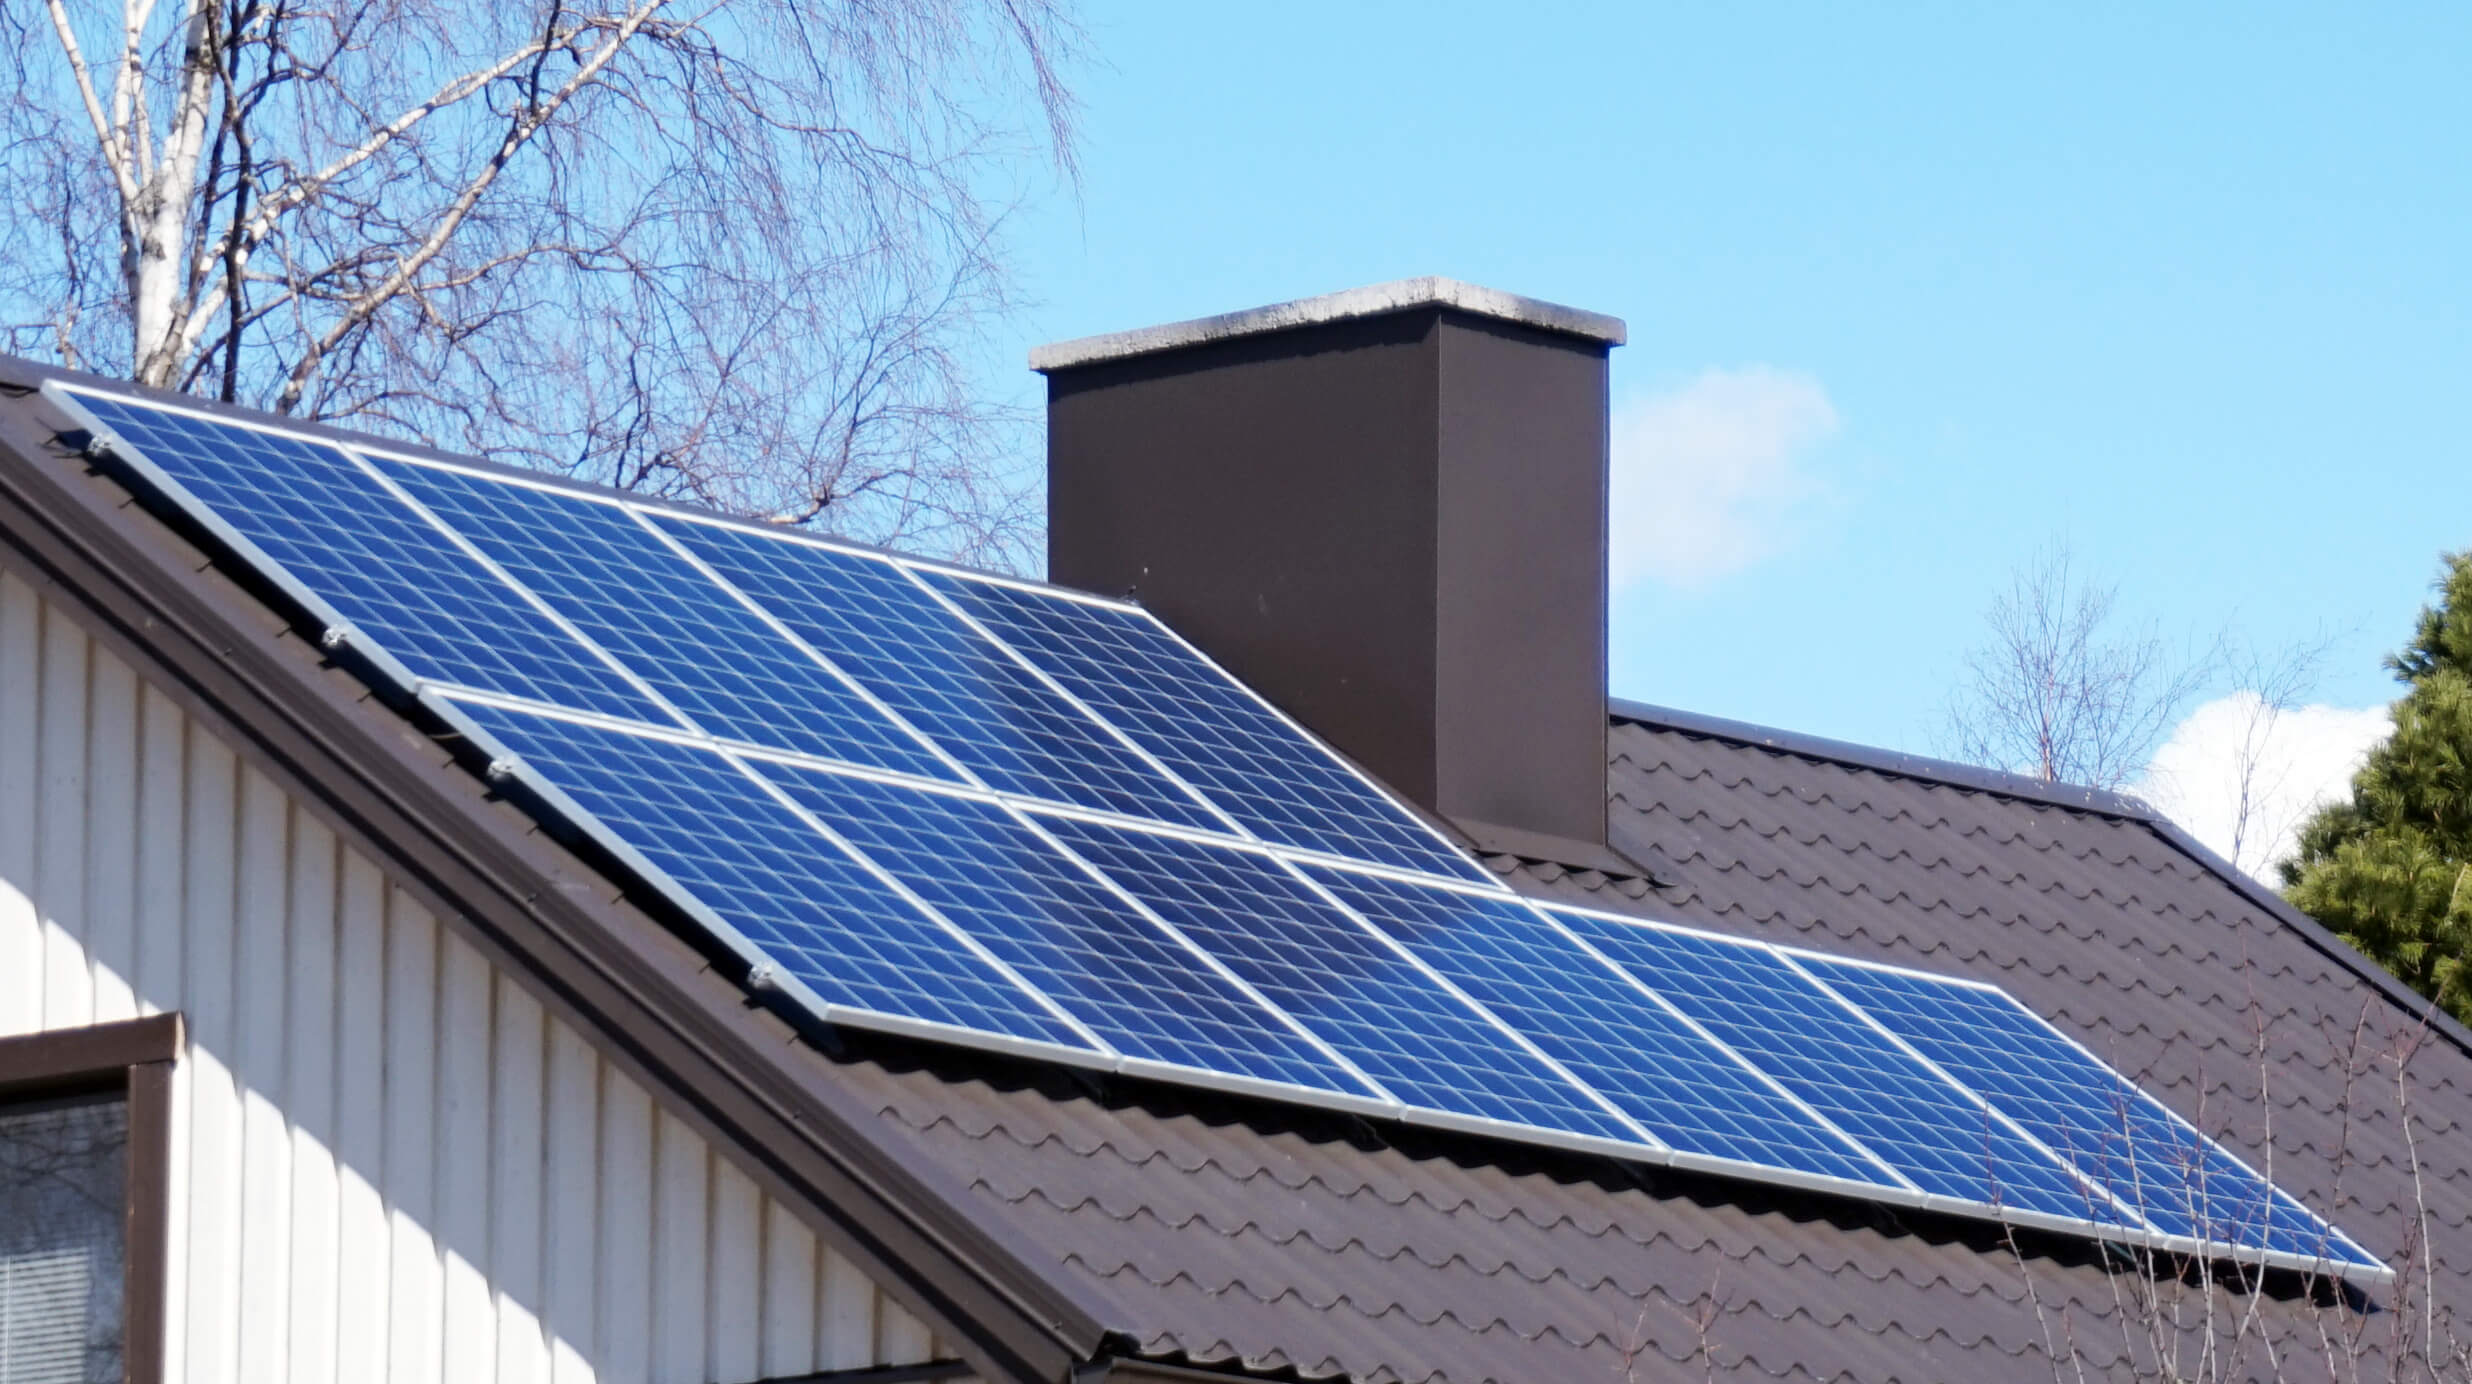 It’s time to remove limits on rooftop solar in Michigan